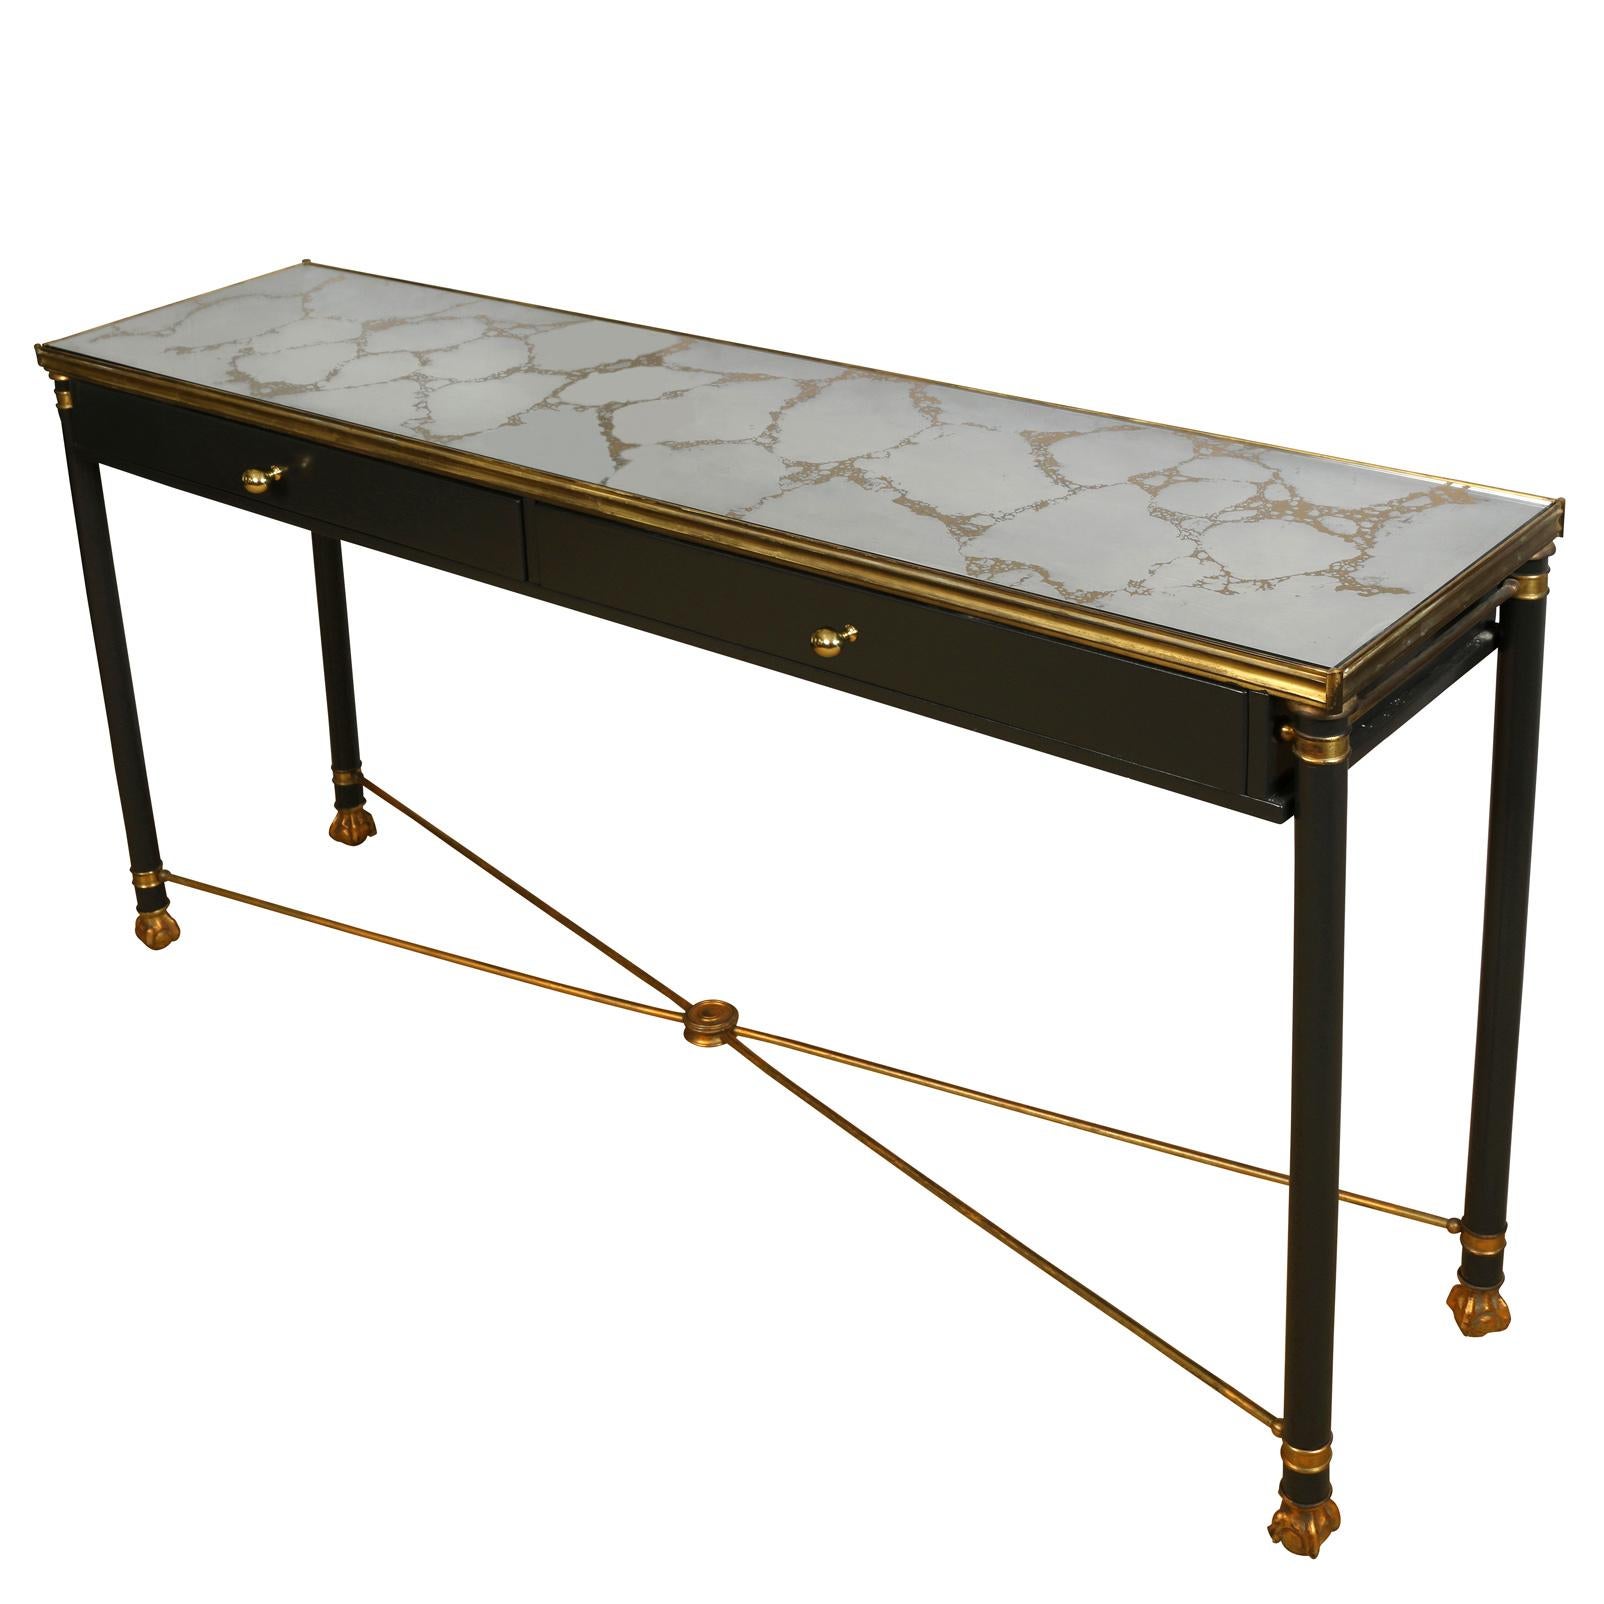 Marbled mirror, Regency style vintage black console with gilt details, gilt X stretcher to straight legs with claw and ball feet, and two drawers for storage.